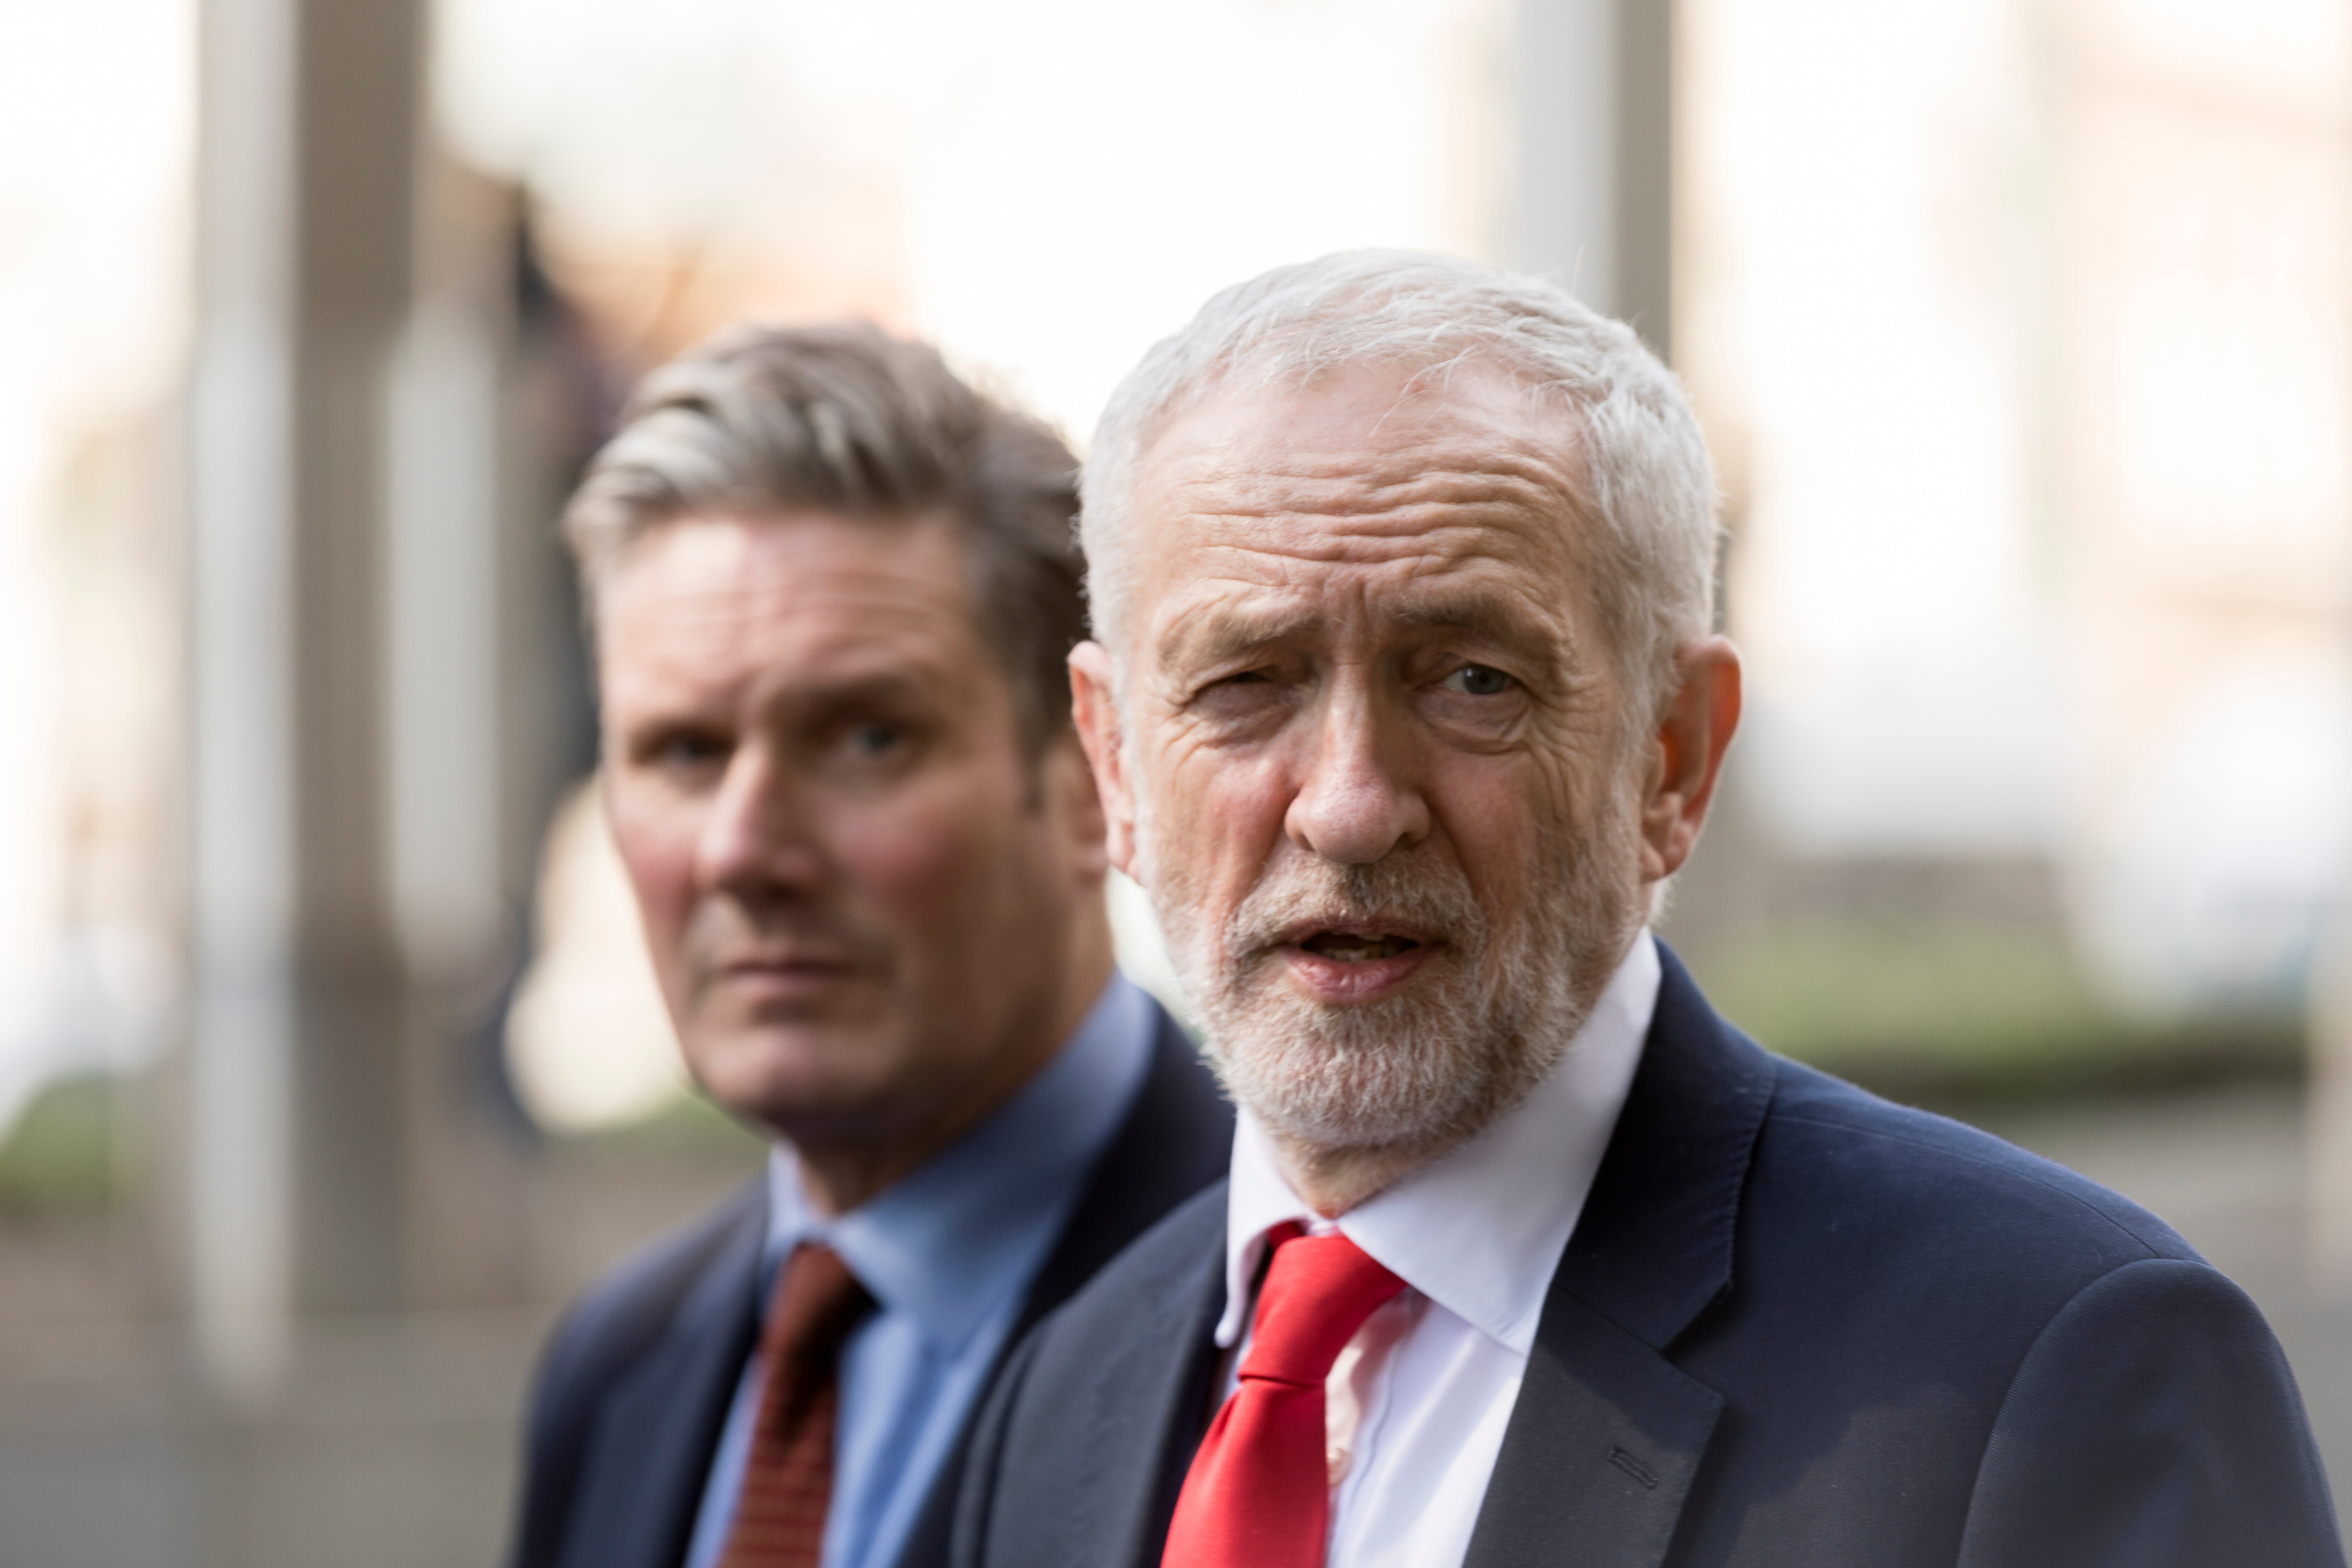 Keir Starmer said several times in 2017 and 2019 that Jeremy Corbyn would make ‘a good prime minister’ – did he really mean it?